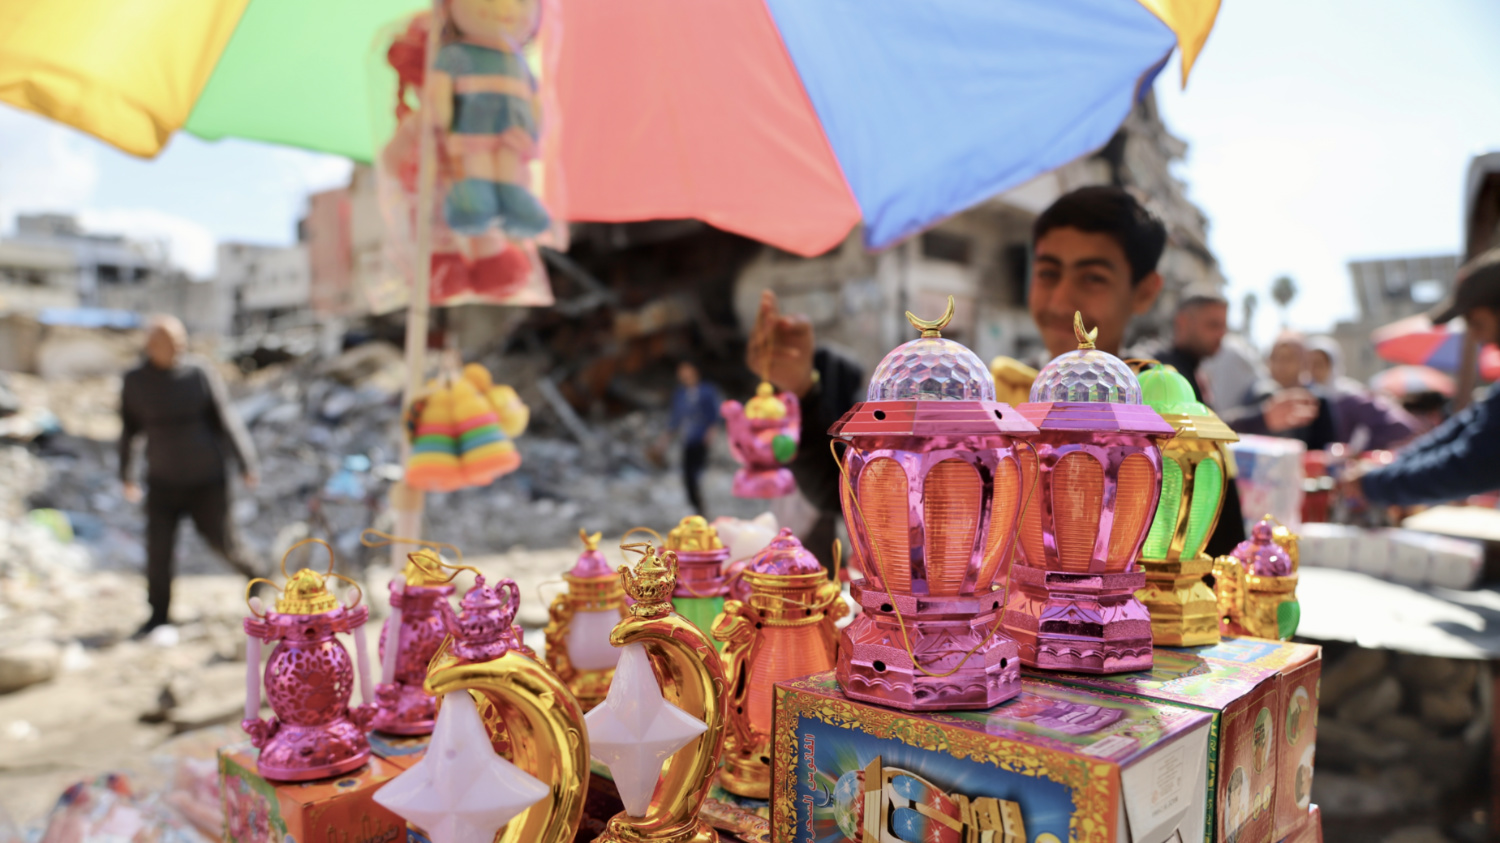 Lanterns and toys on a stand facing the destruction in northern Gaza (Mohammed al-Hajjar/MEE).